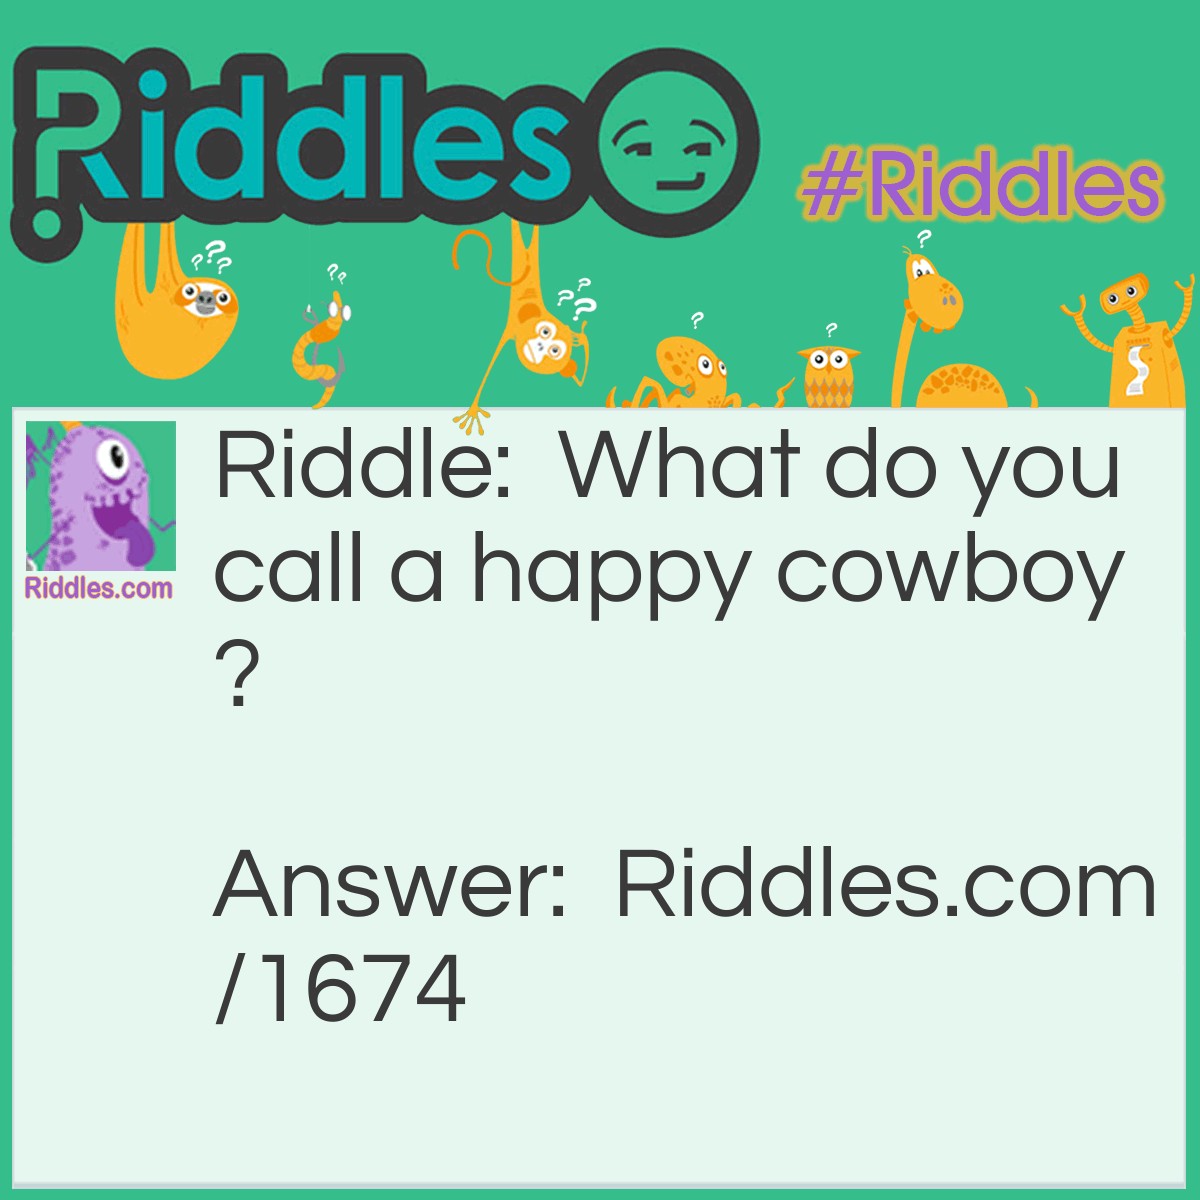 Riddle: What do you call a happy cowboy? Answer: A jolly rancher.